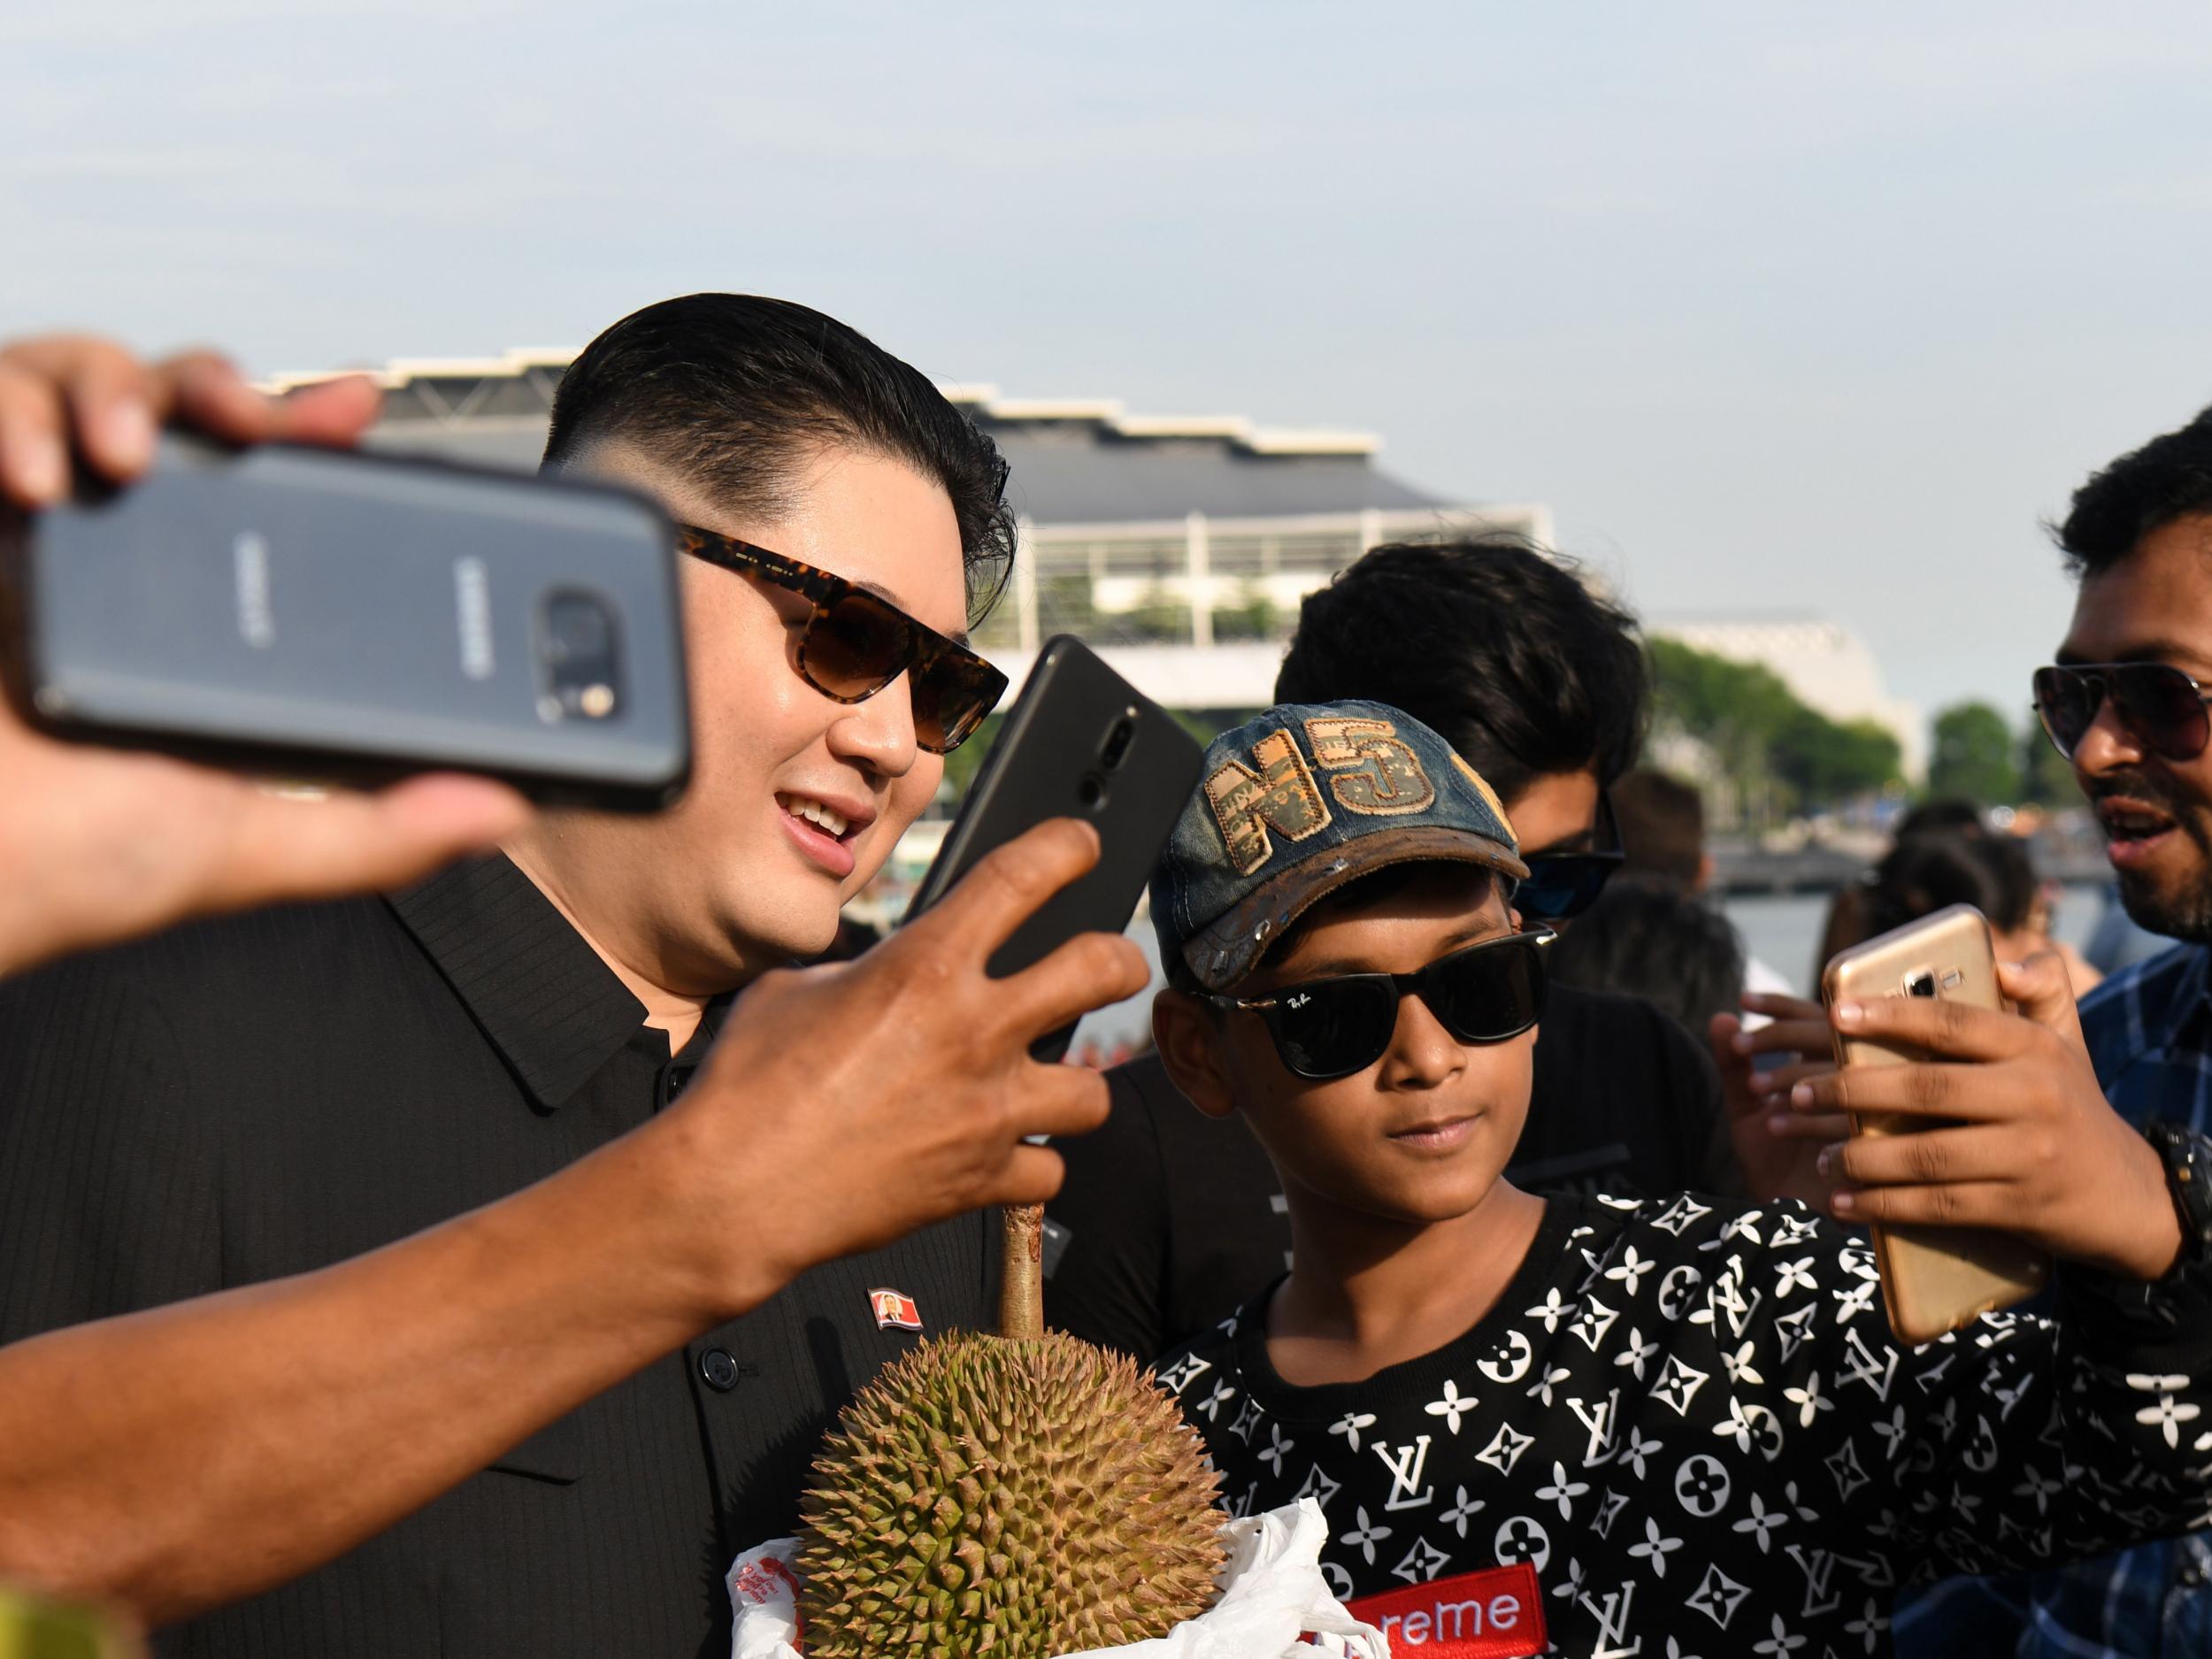 A Kim Jong-un impersonator takes selfies in Singapore’s Merlion Park. The world is gearing up for the planned summit between Mr Kim and Donald Trump as officials from both sides criss-cross the globe